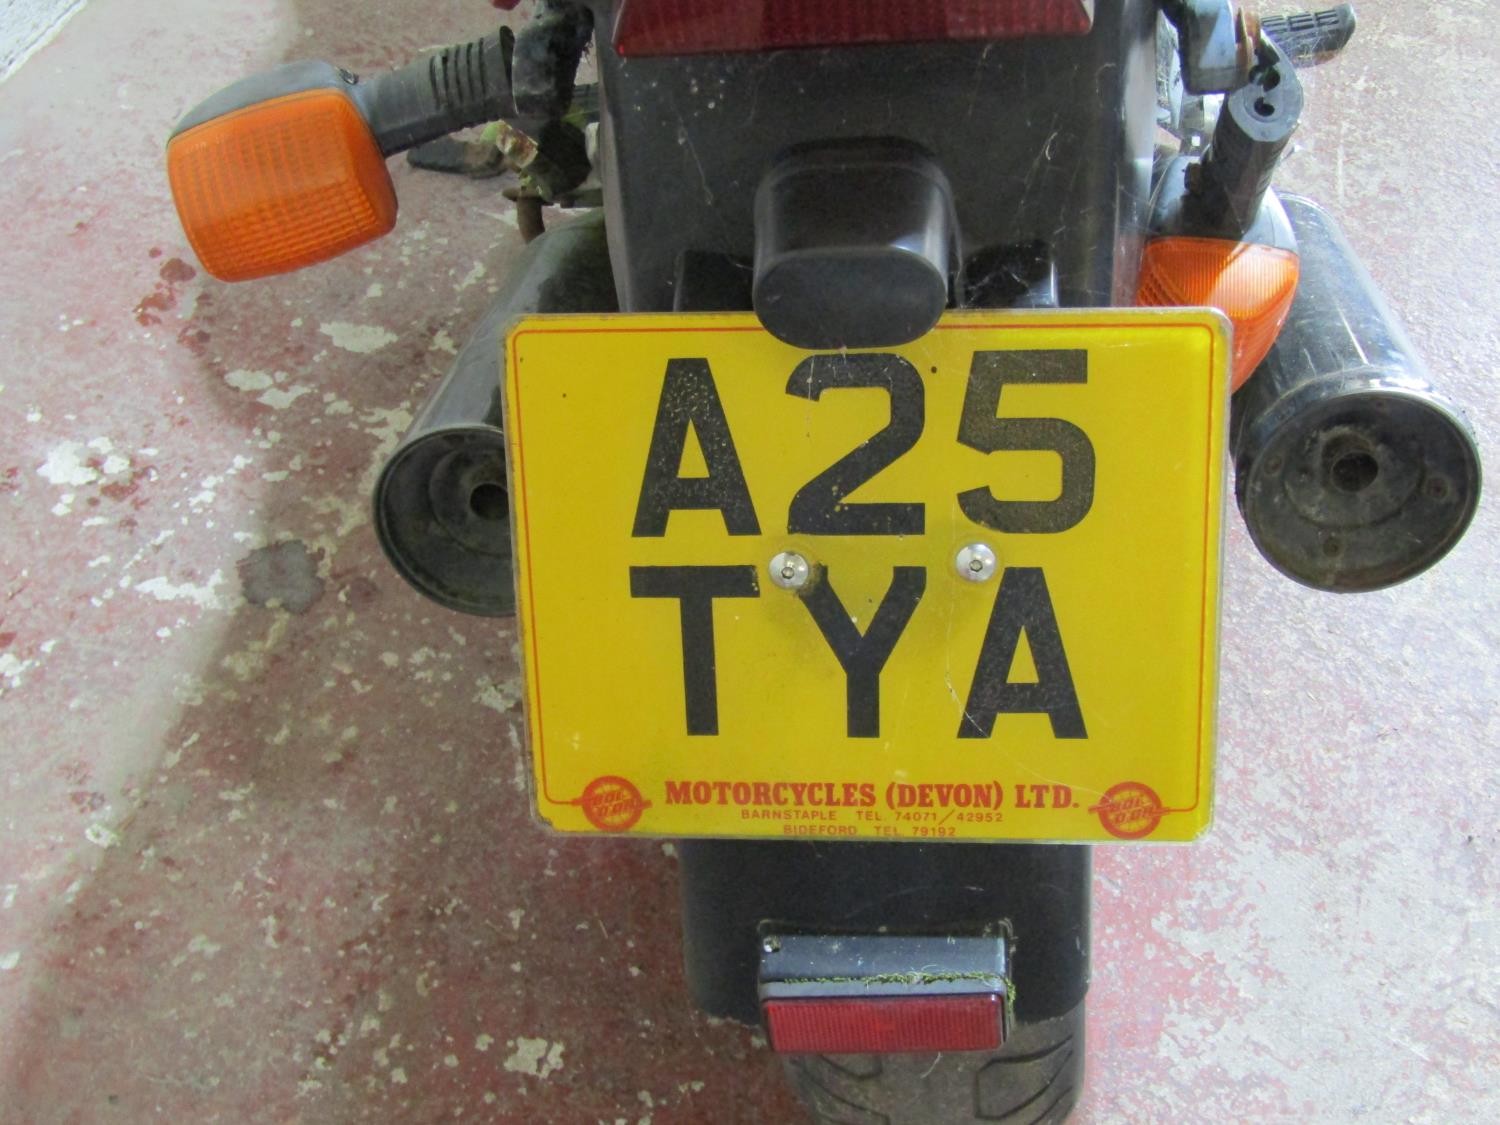 A Honda VF750 V-Twin motorcycle, registration number A25 TWA (no V5C logbook present) Sold without - Image 2 of 10